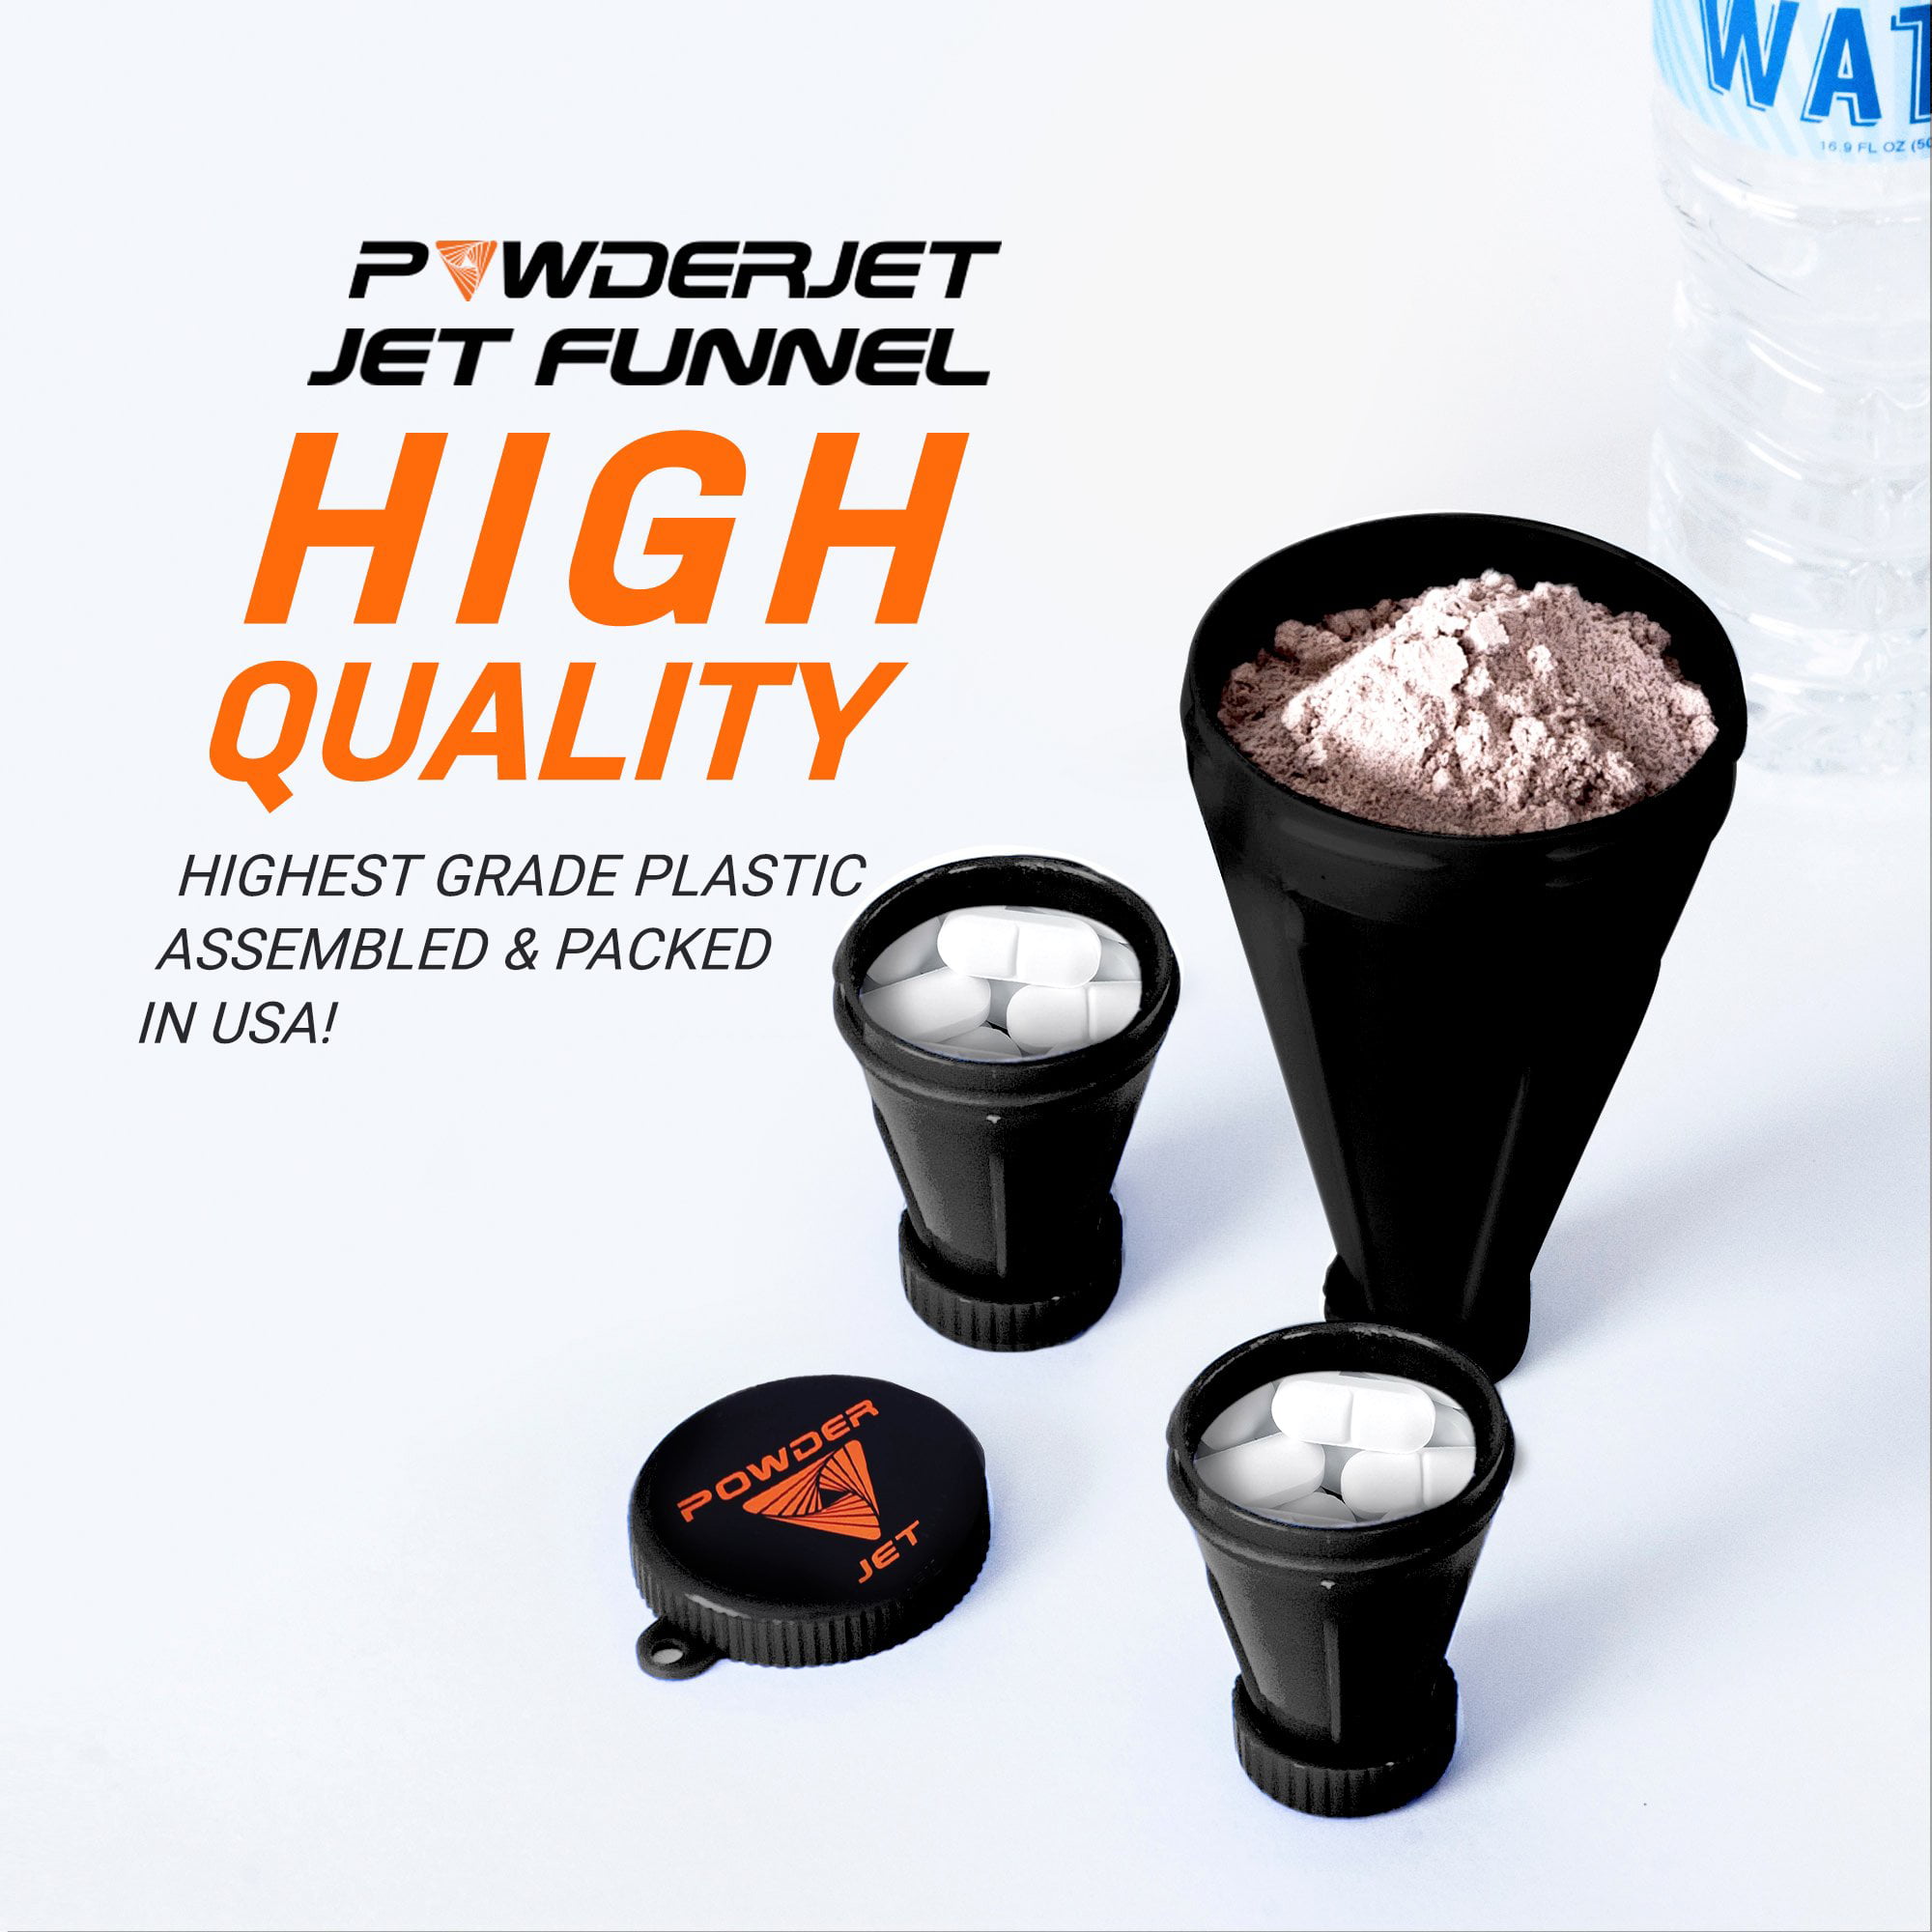 Indigo 2 Protein Funnel Powder Device, Protein Powder Containers to Go, and  Powder Mixer, Tight-Lock Containers for Protein Powder and Pre Workout